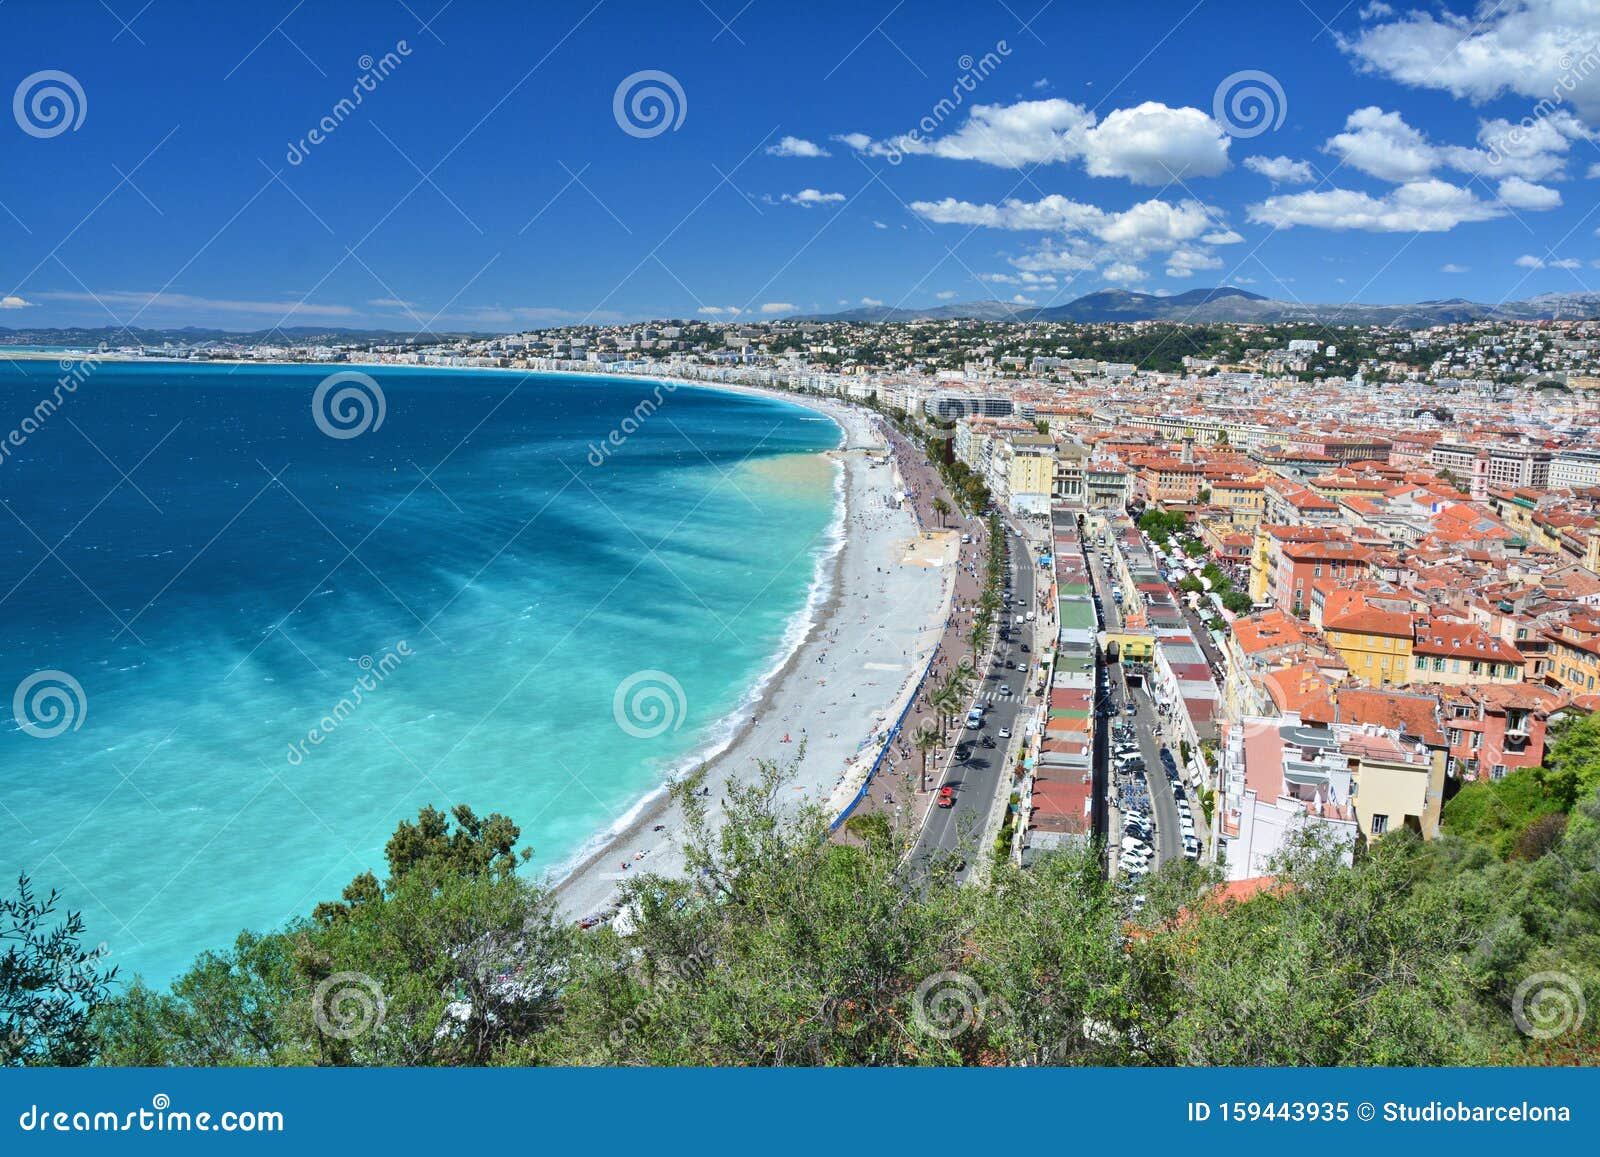 nice, french riviera cote d`azur in provence, france